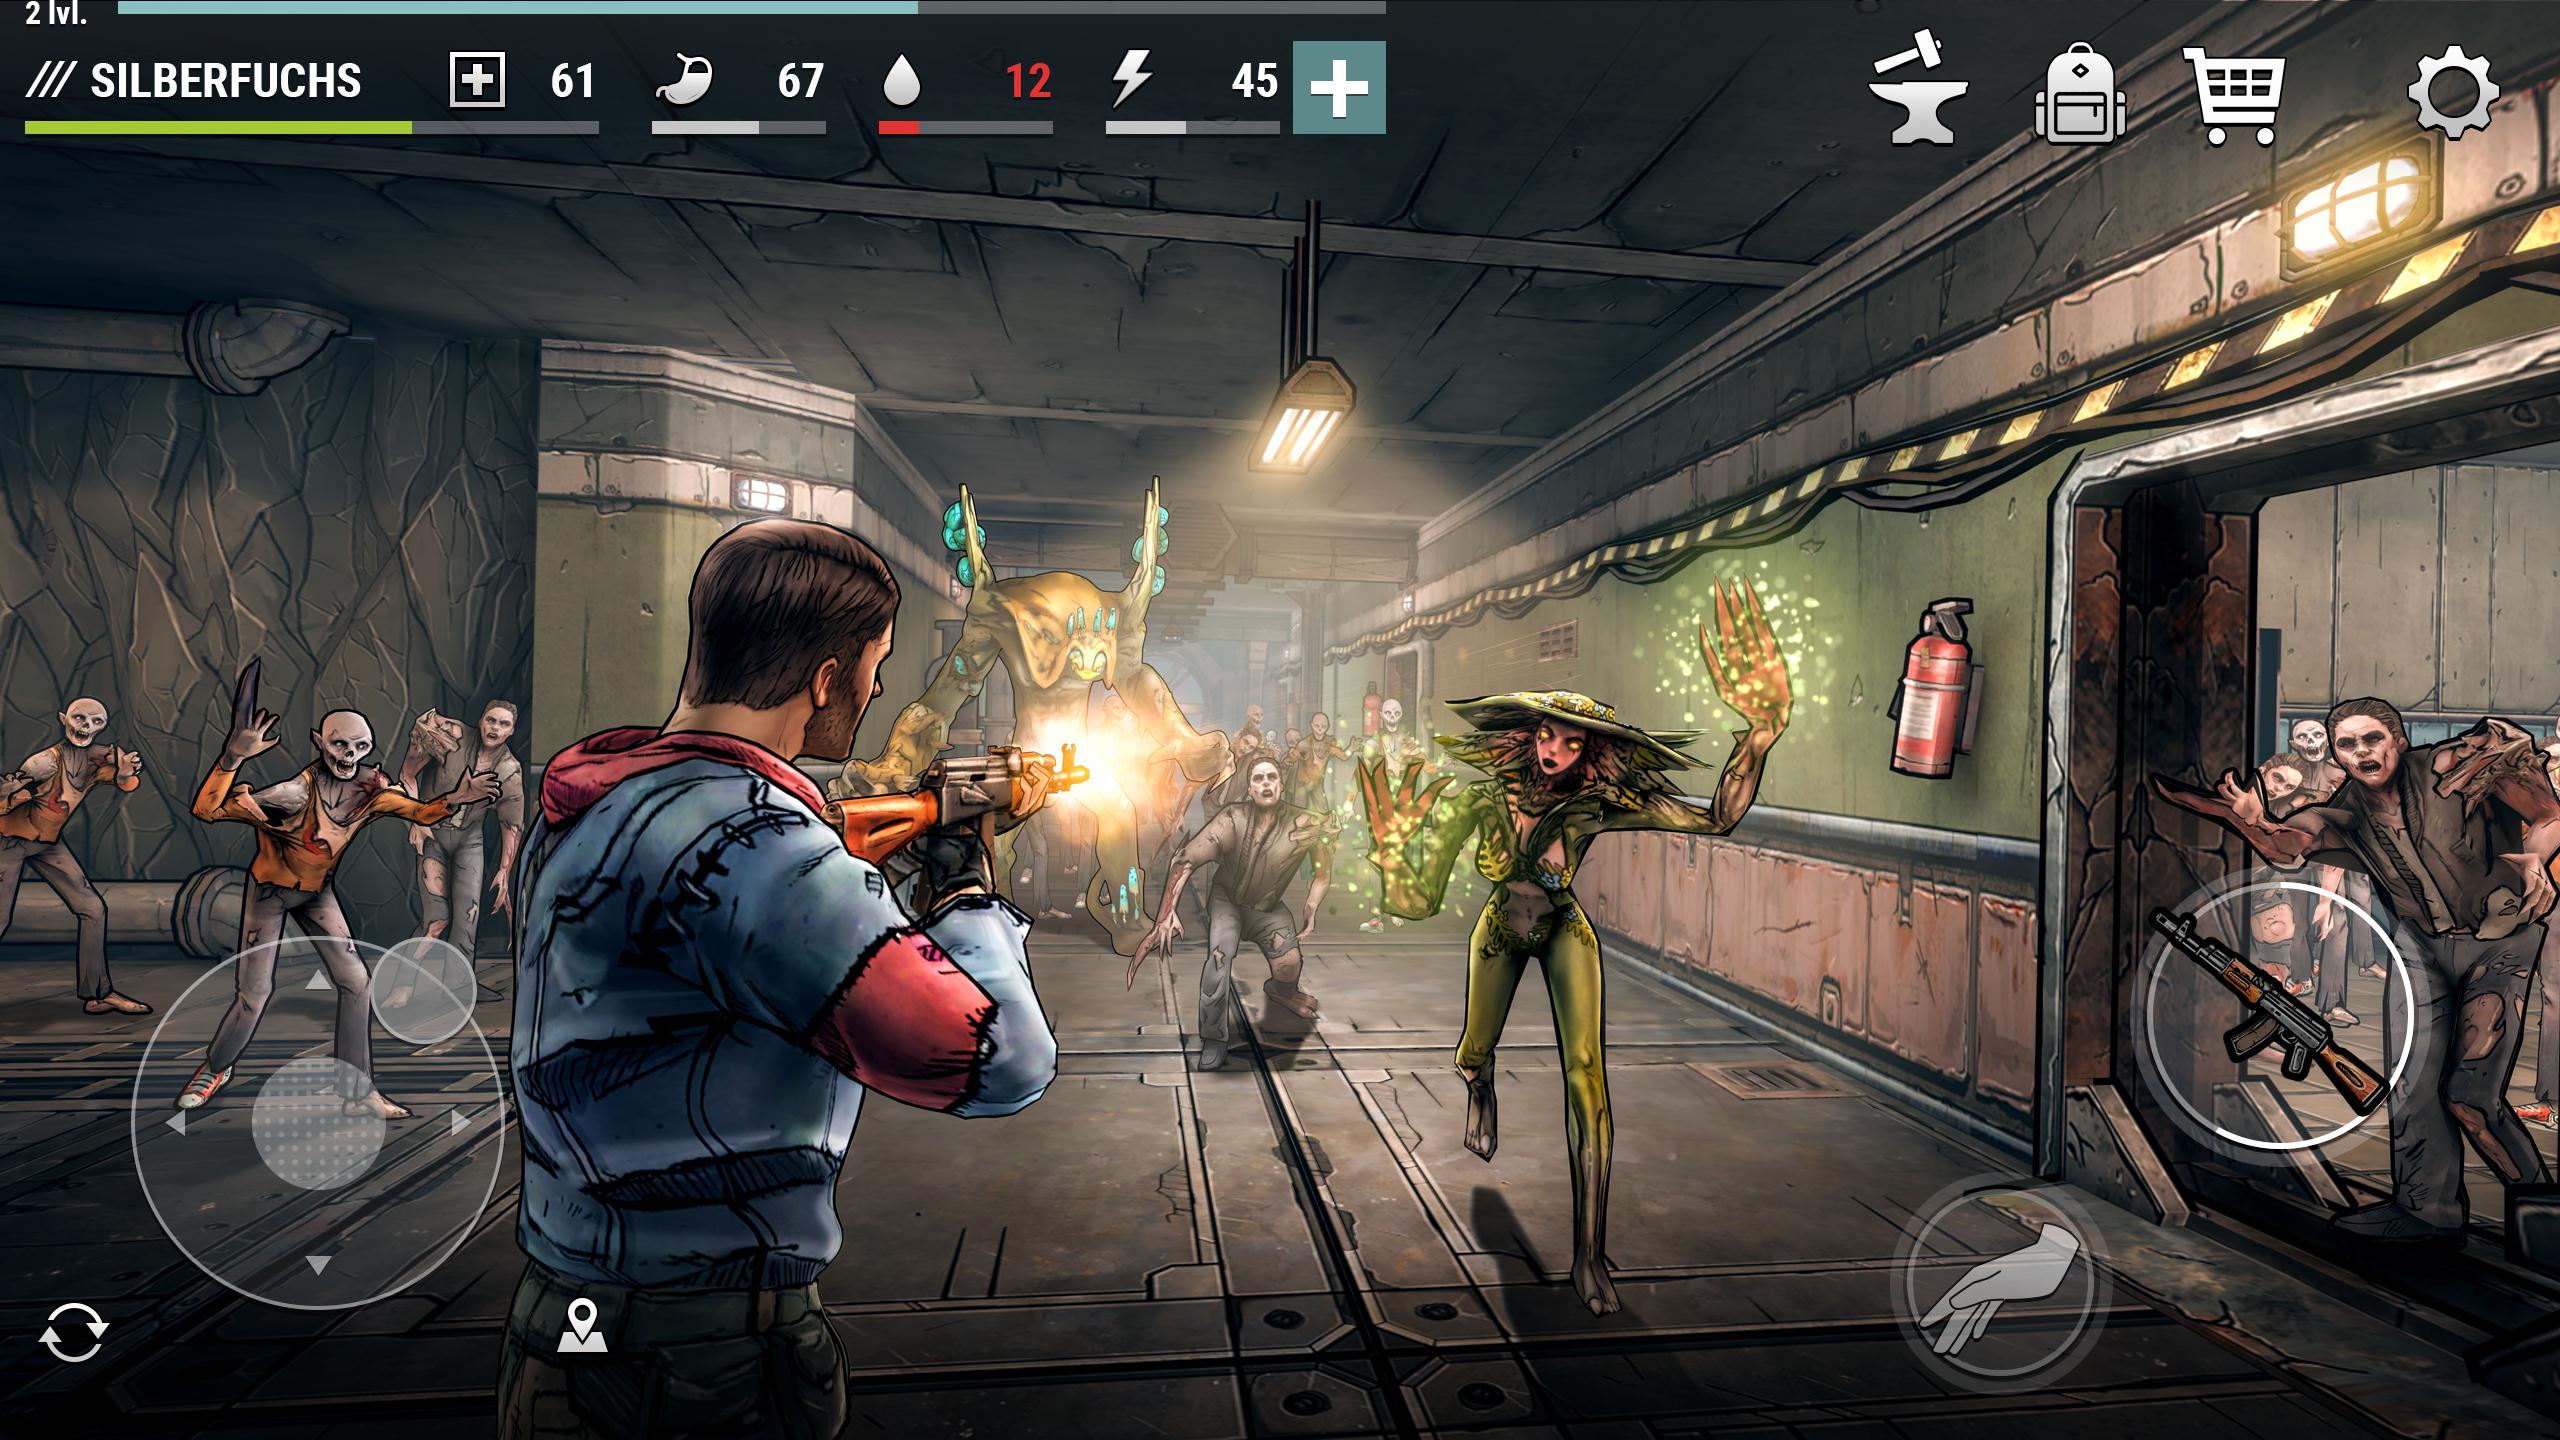 Dark Days for Android - APK Download